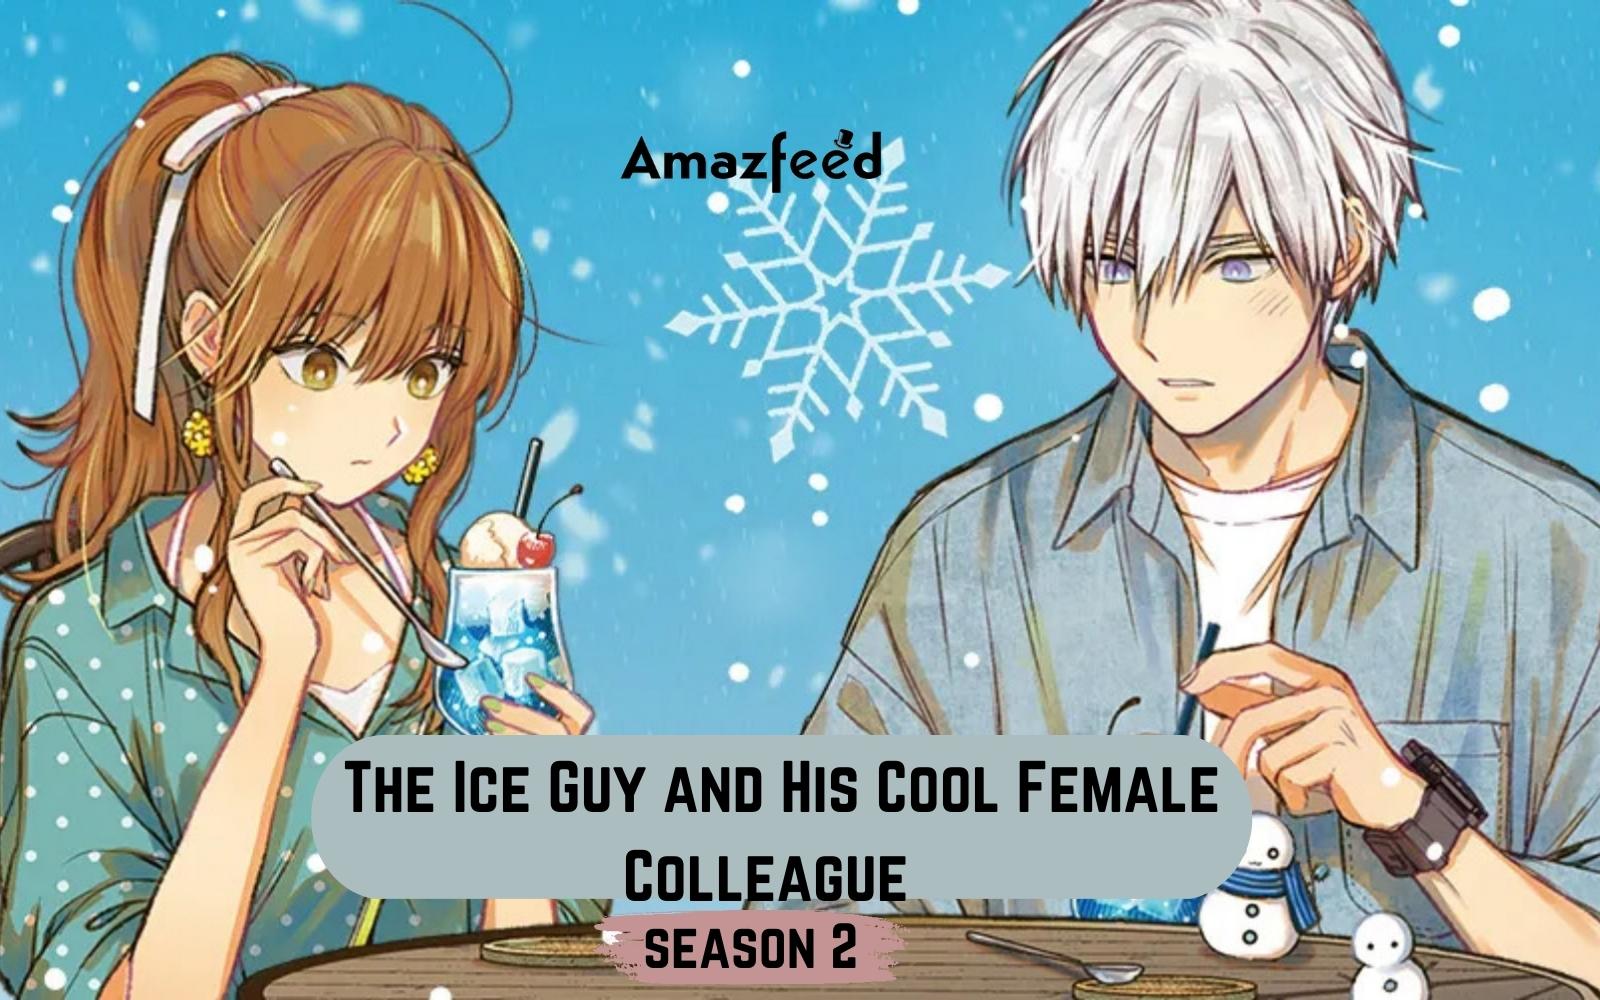 The Ice Guy and His Cool Female Colleague season 2 - Release